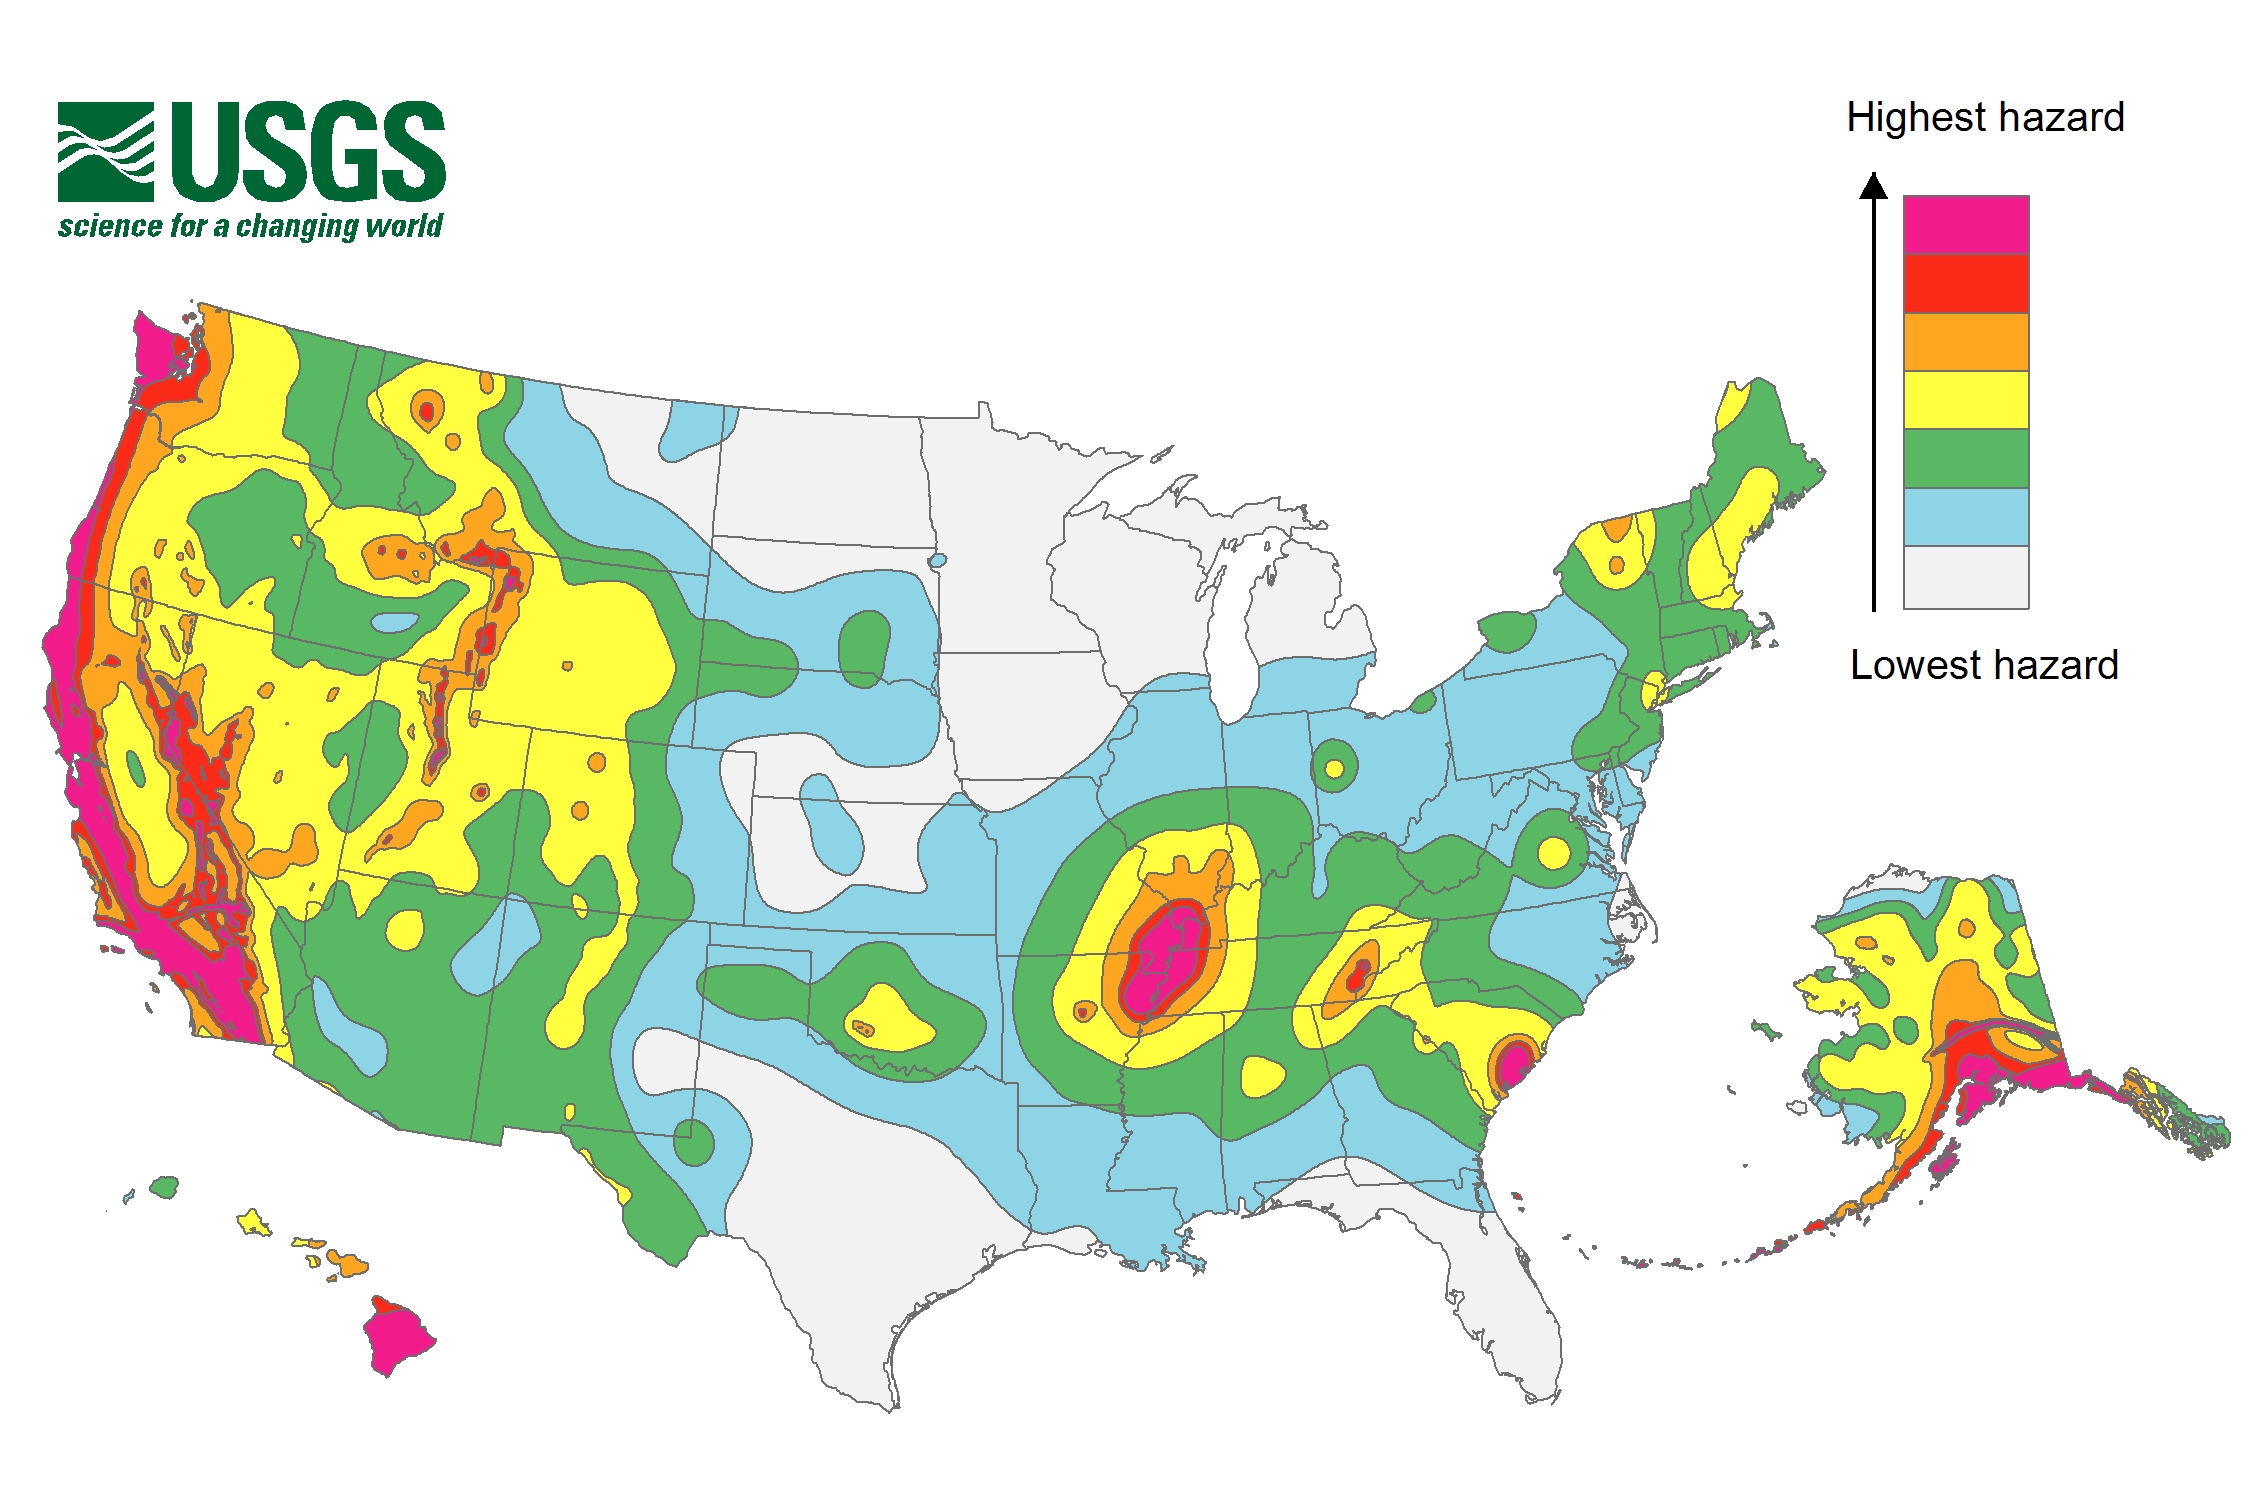 2014 USGS National Seismic Hazard Map, displaying intensity of potential ground shaking from an earthquake in 50 years (which is the typical lifetime of a building).